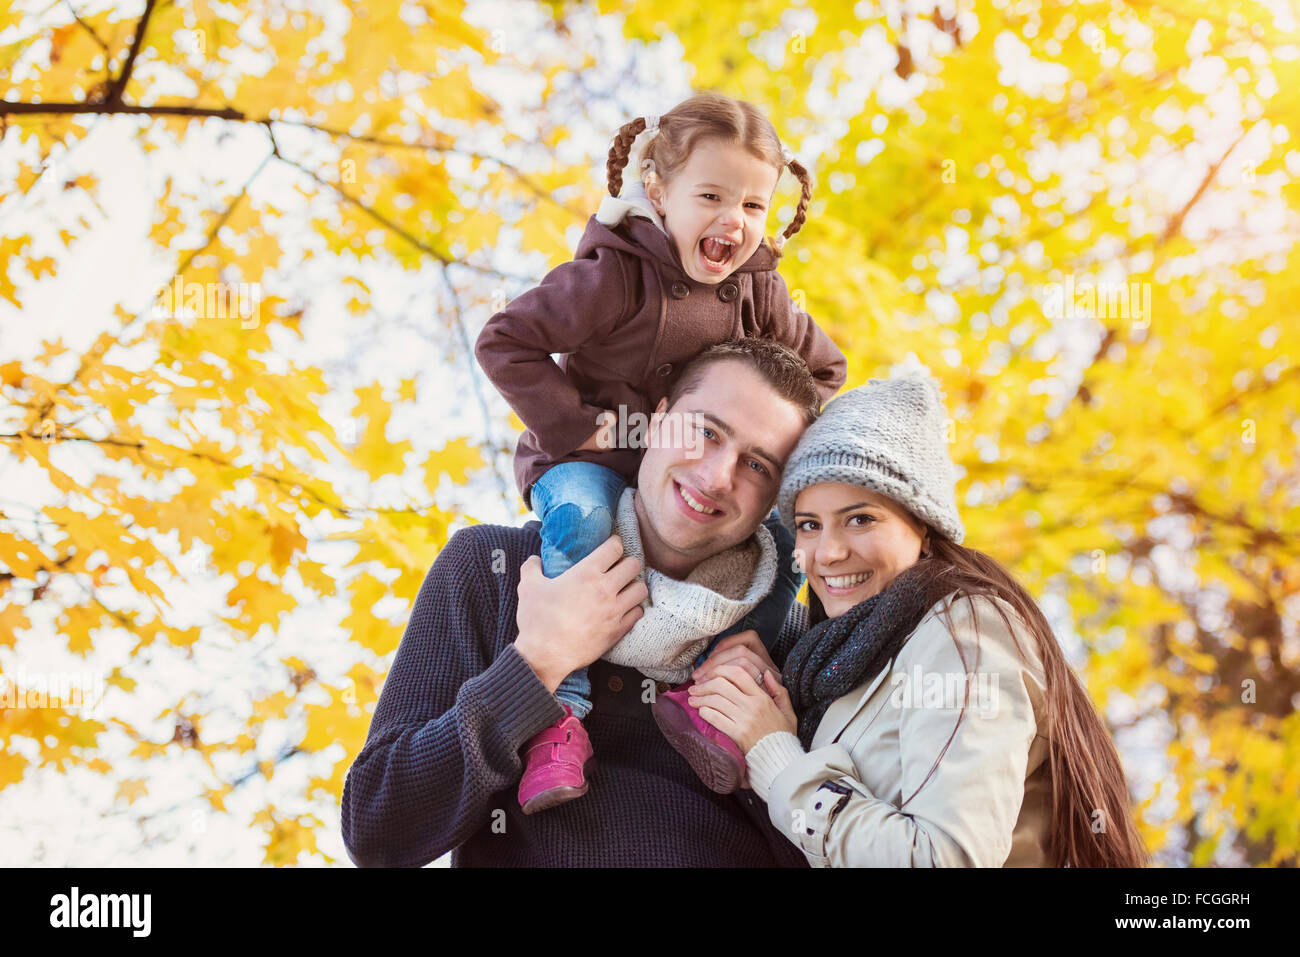 Happy Family in autumnal park Banque D'Images